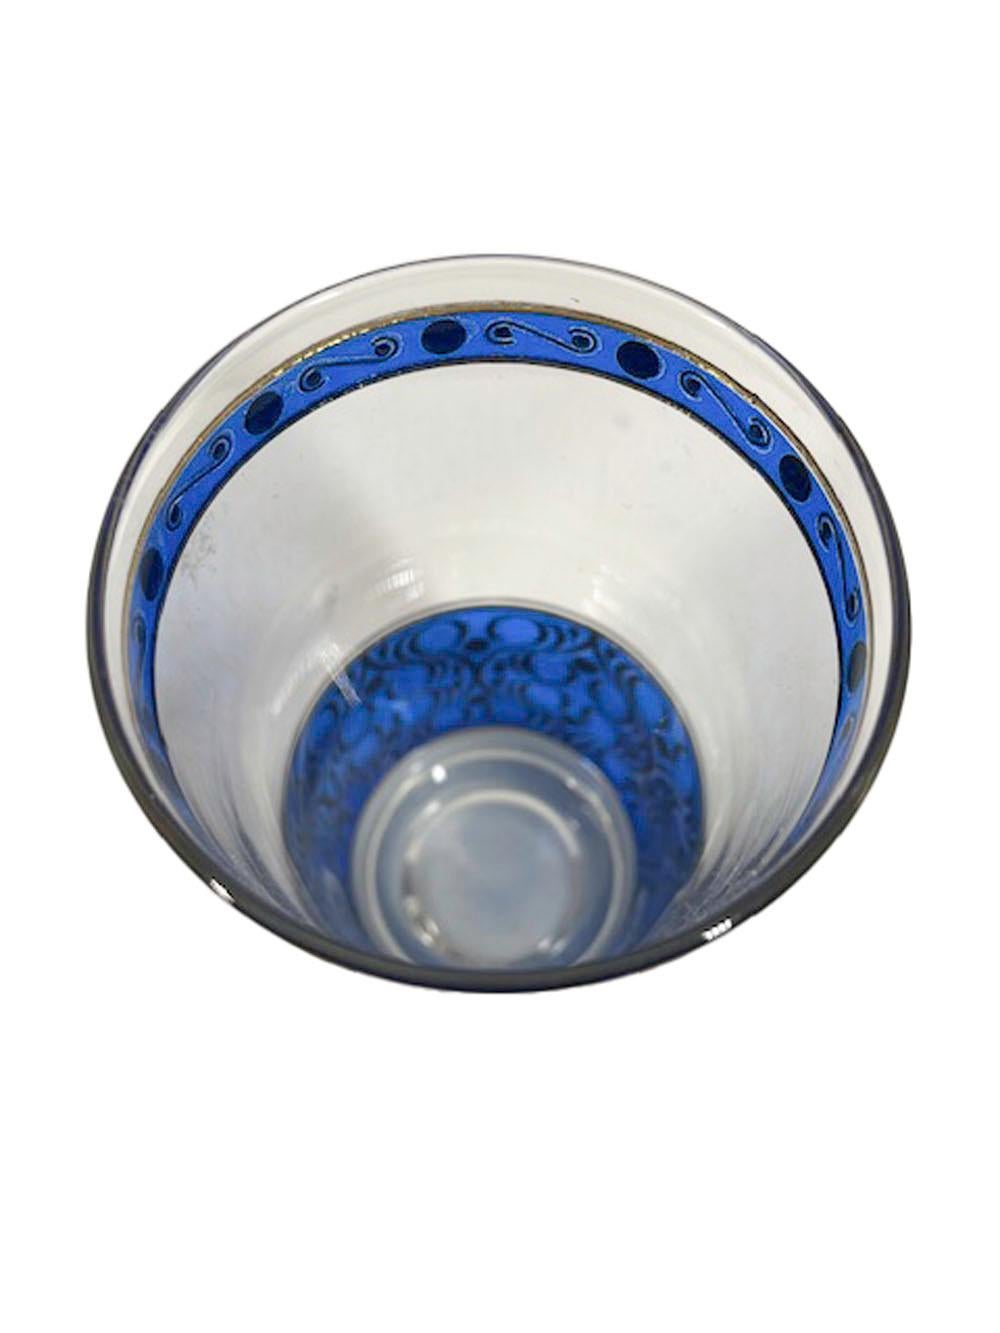 American Eight Vintage Highball Glasses with 22k Gold over Translucent Blue Enamel